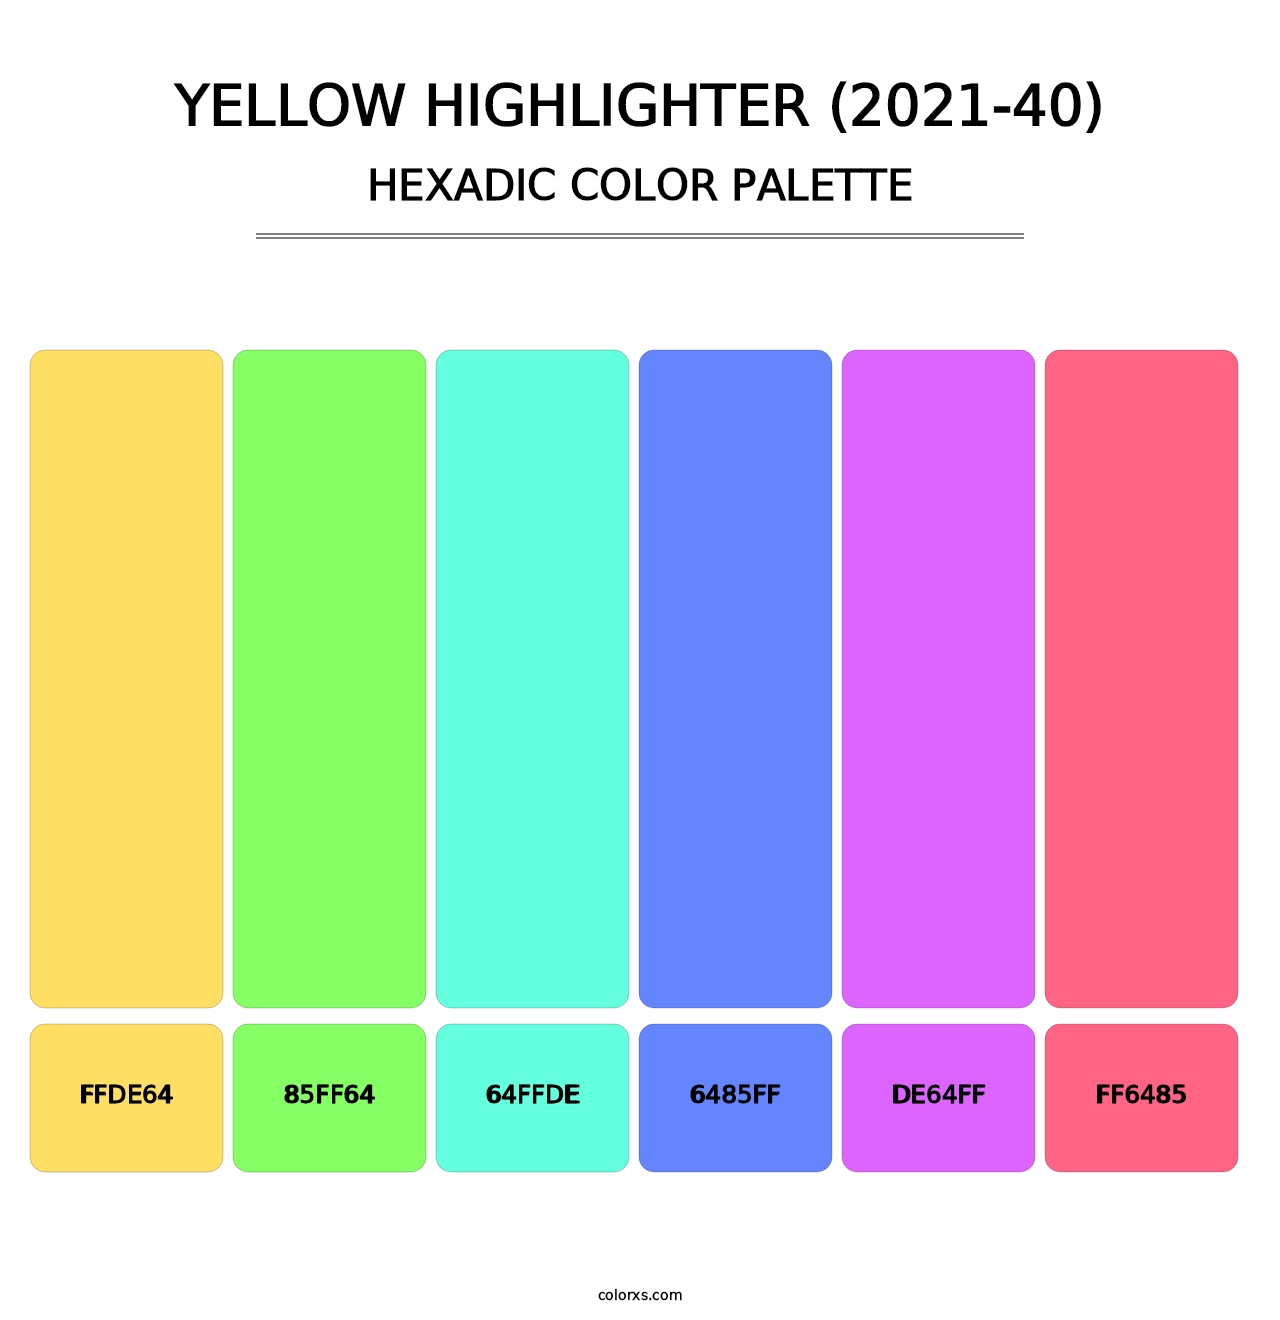 Yellow Highlighter (2021-40) - Hexadic Color Palette